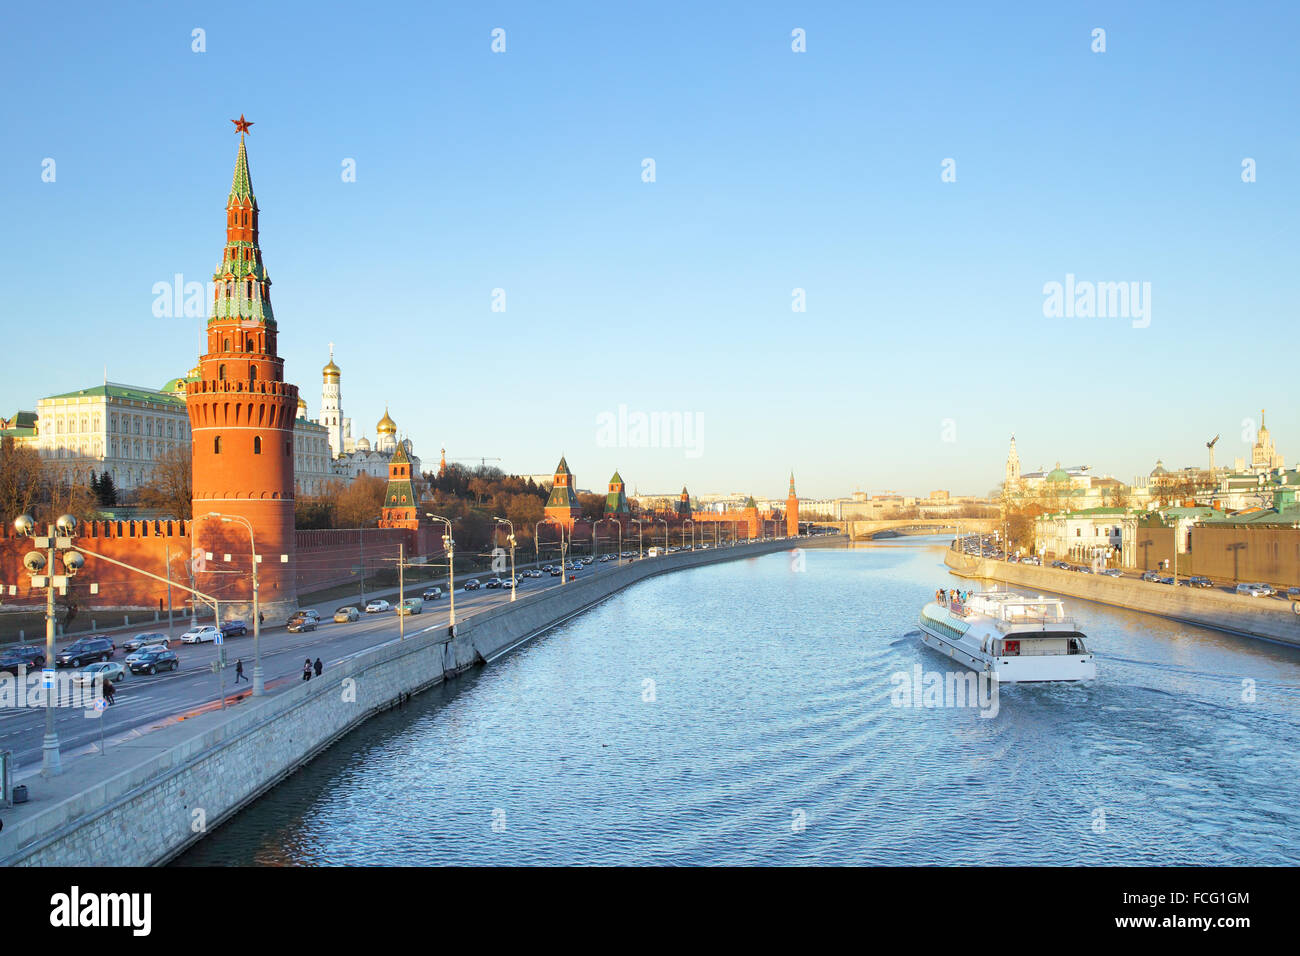 Evening view of Moskva River and Moscow Kremlin, Russia Stock Photo